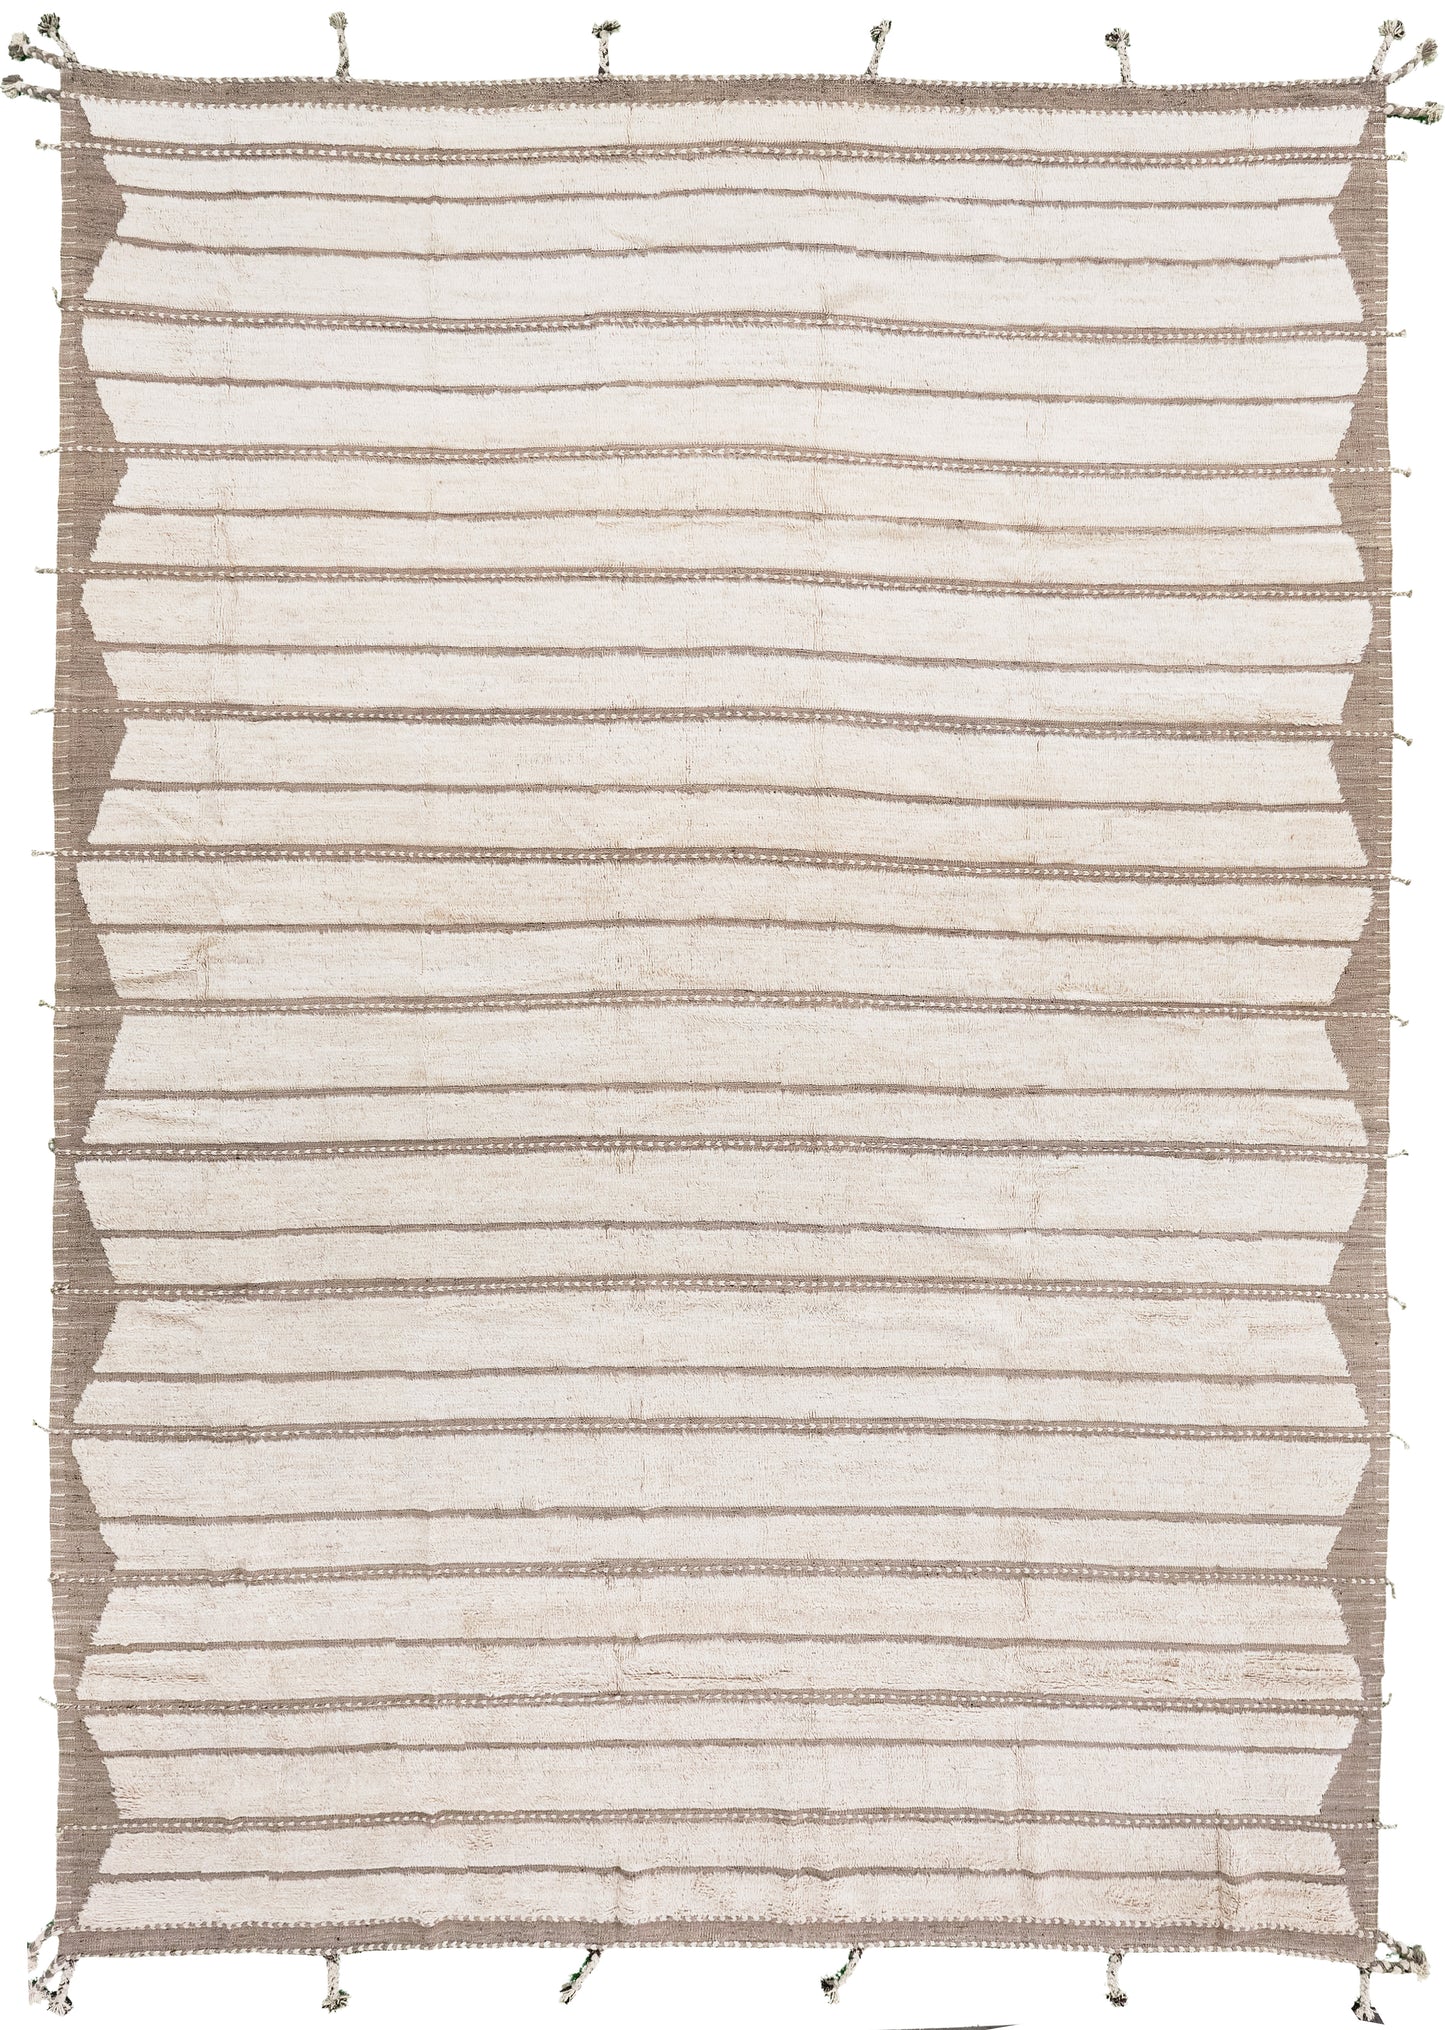 Modern Rug Image 3218 Abrolhos, Haute Bohemian Collection